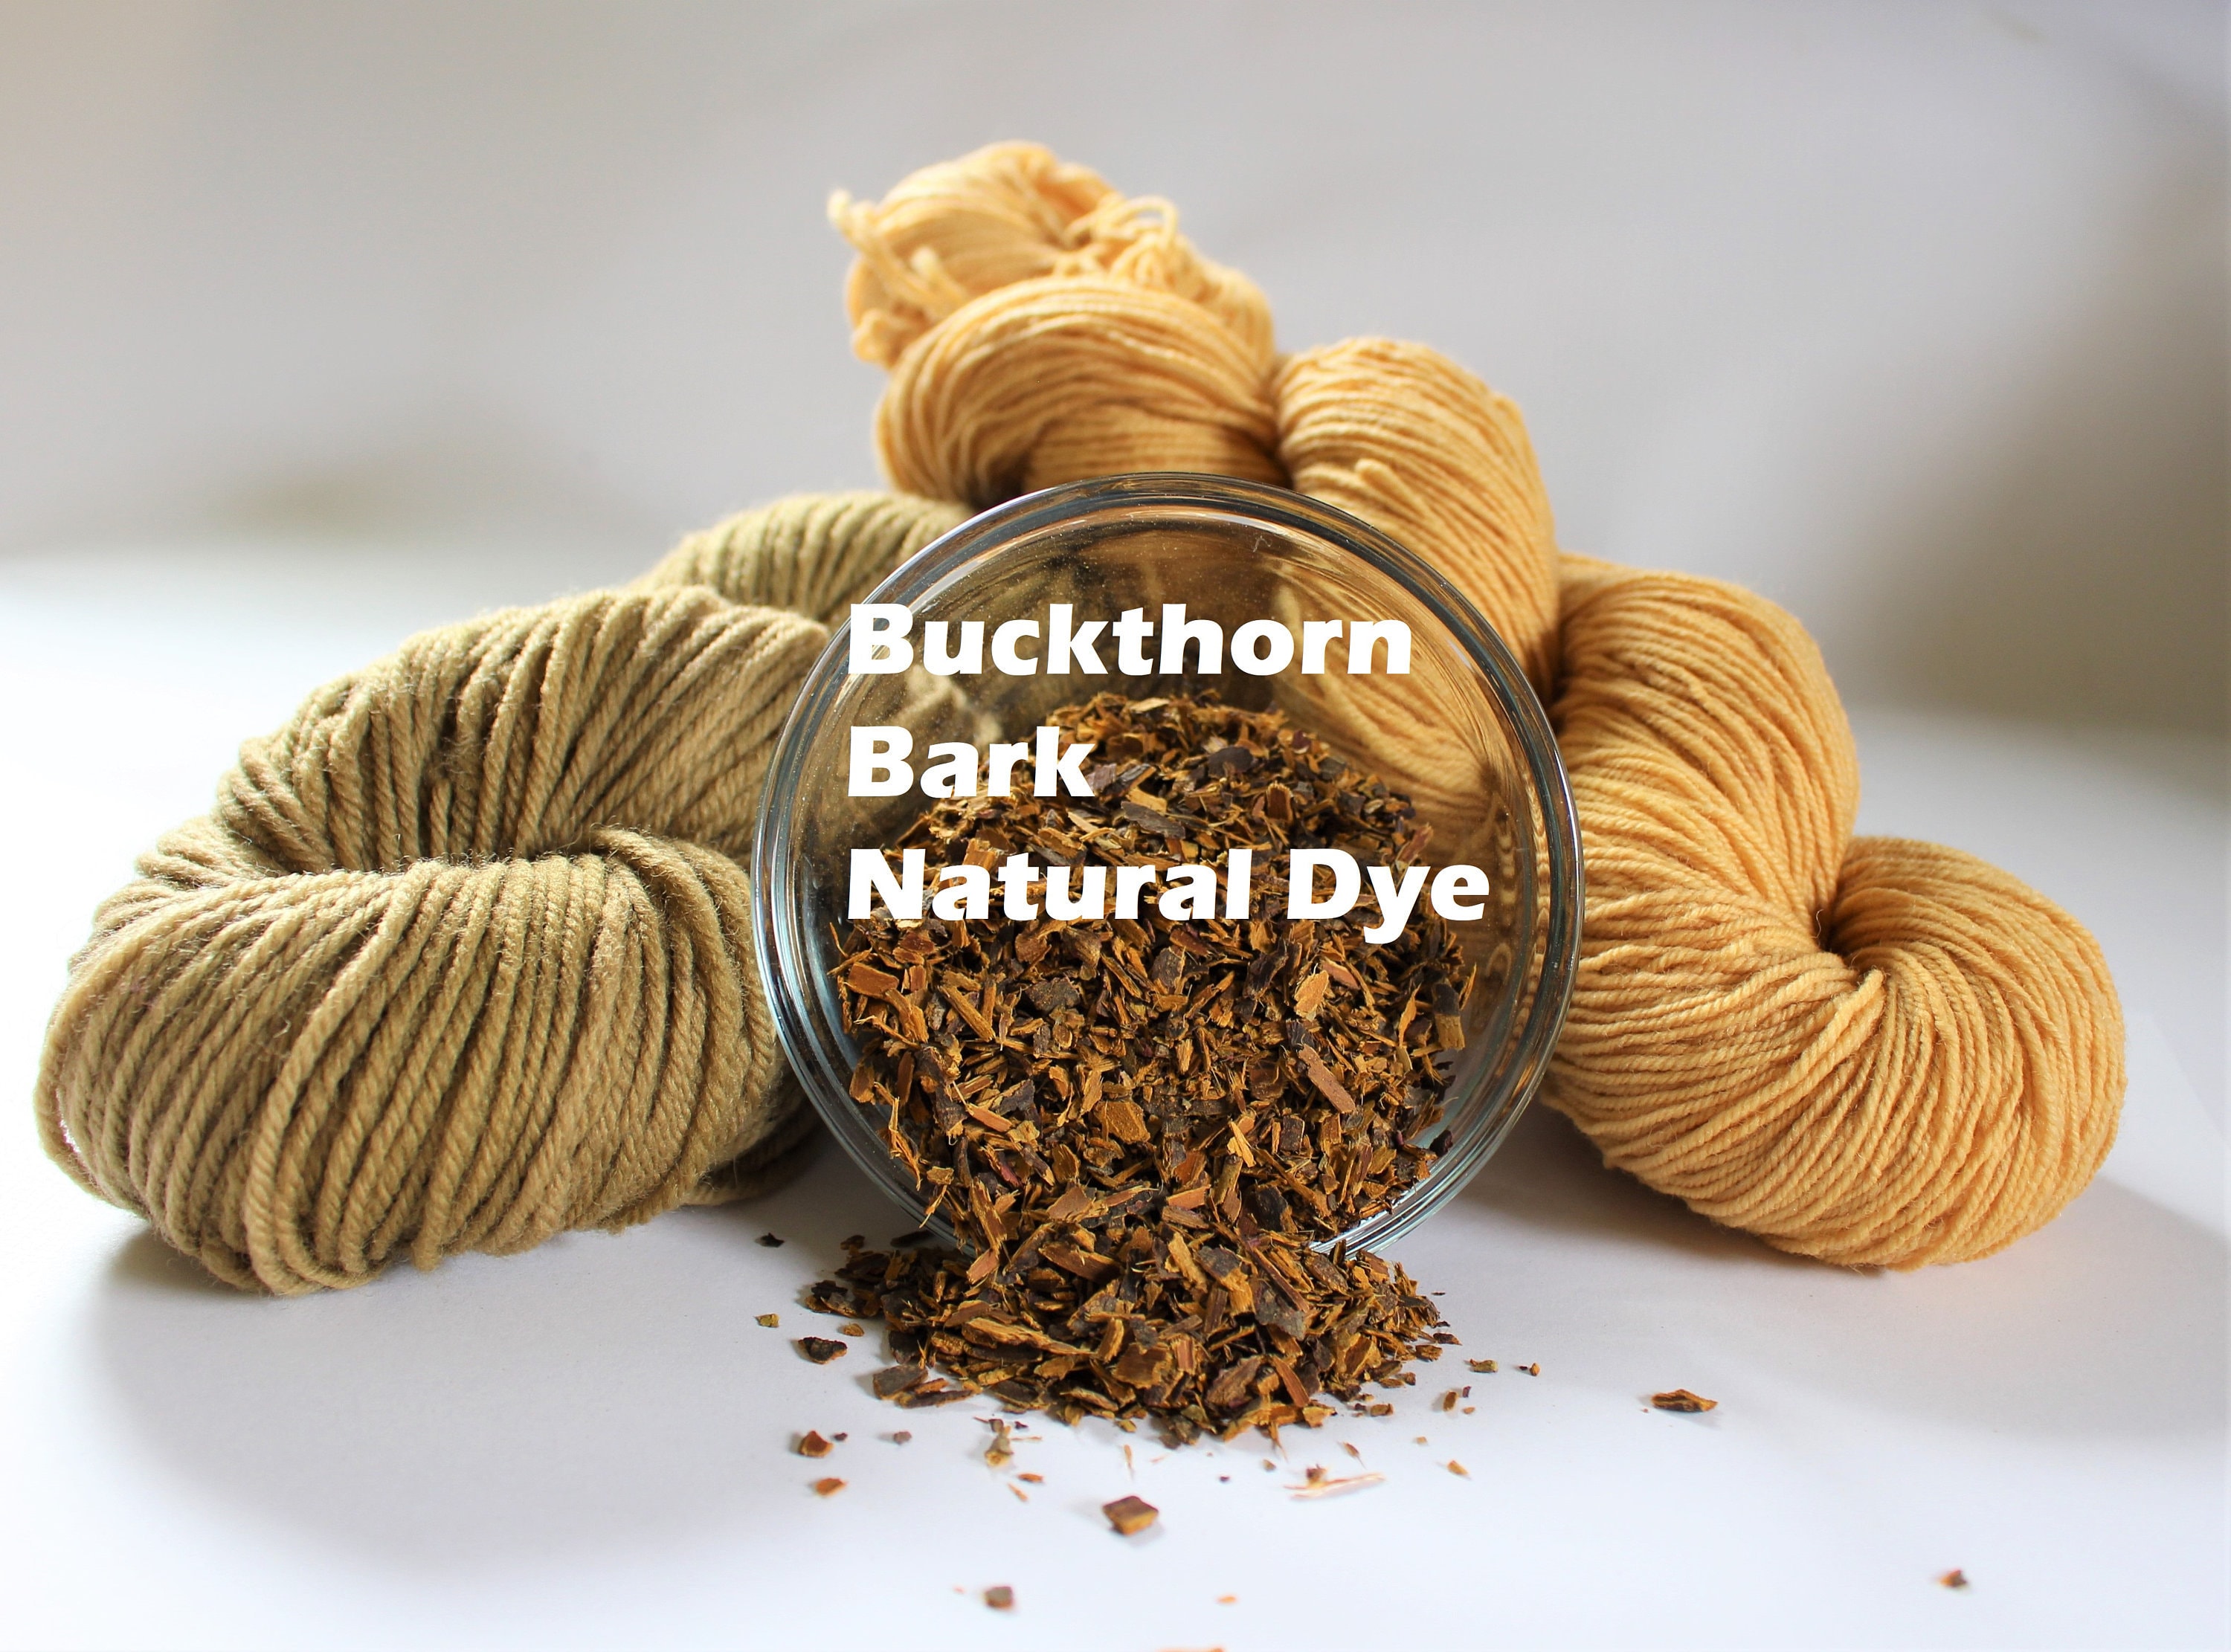 Jacquard Acid Dyes 1/2 Oz for Dyeing Wool, Protein Fibres 